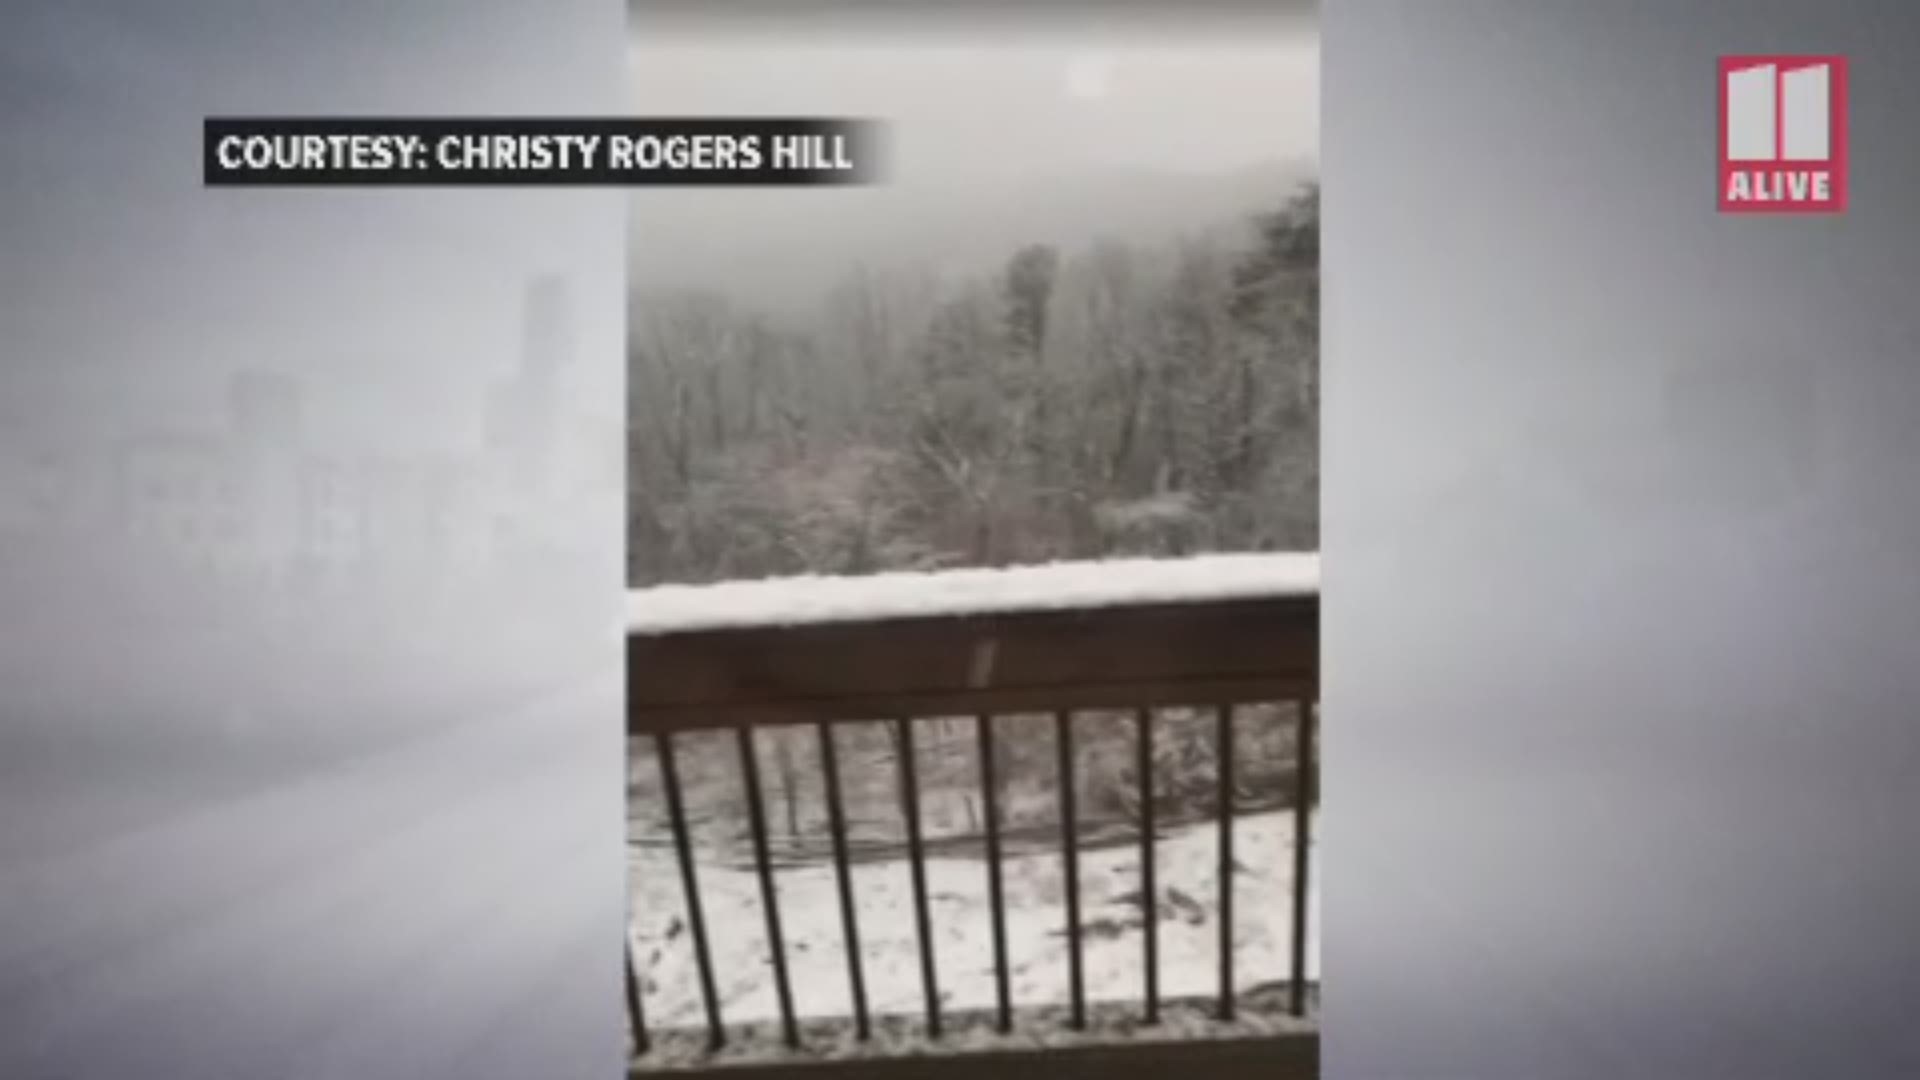 11Alive StormTrackers share videos of the snow on Friday, Jan. 31 in north Georgia.